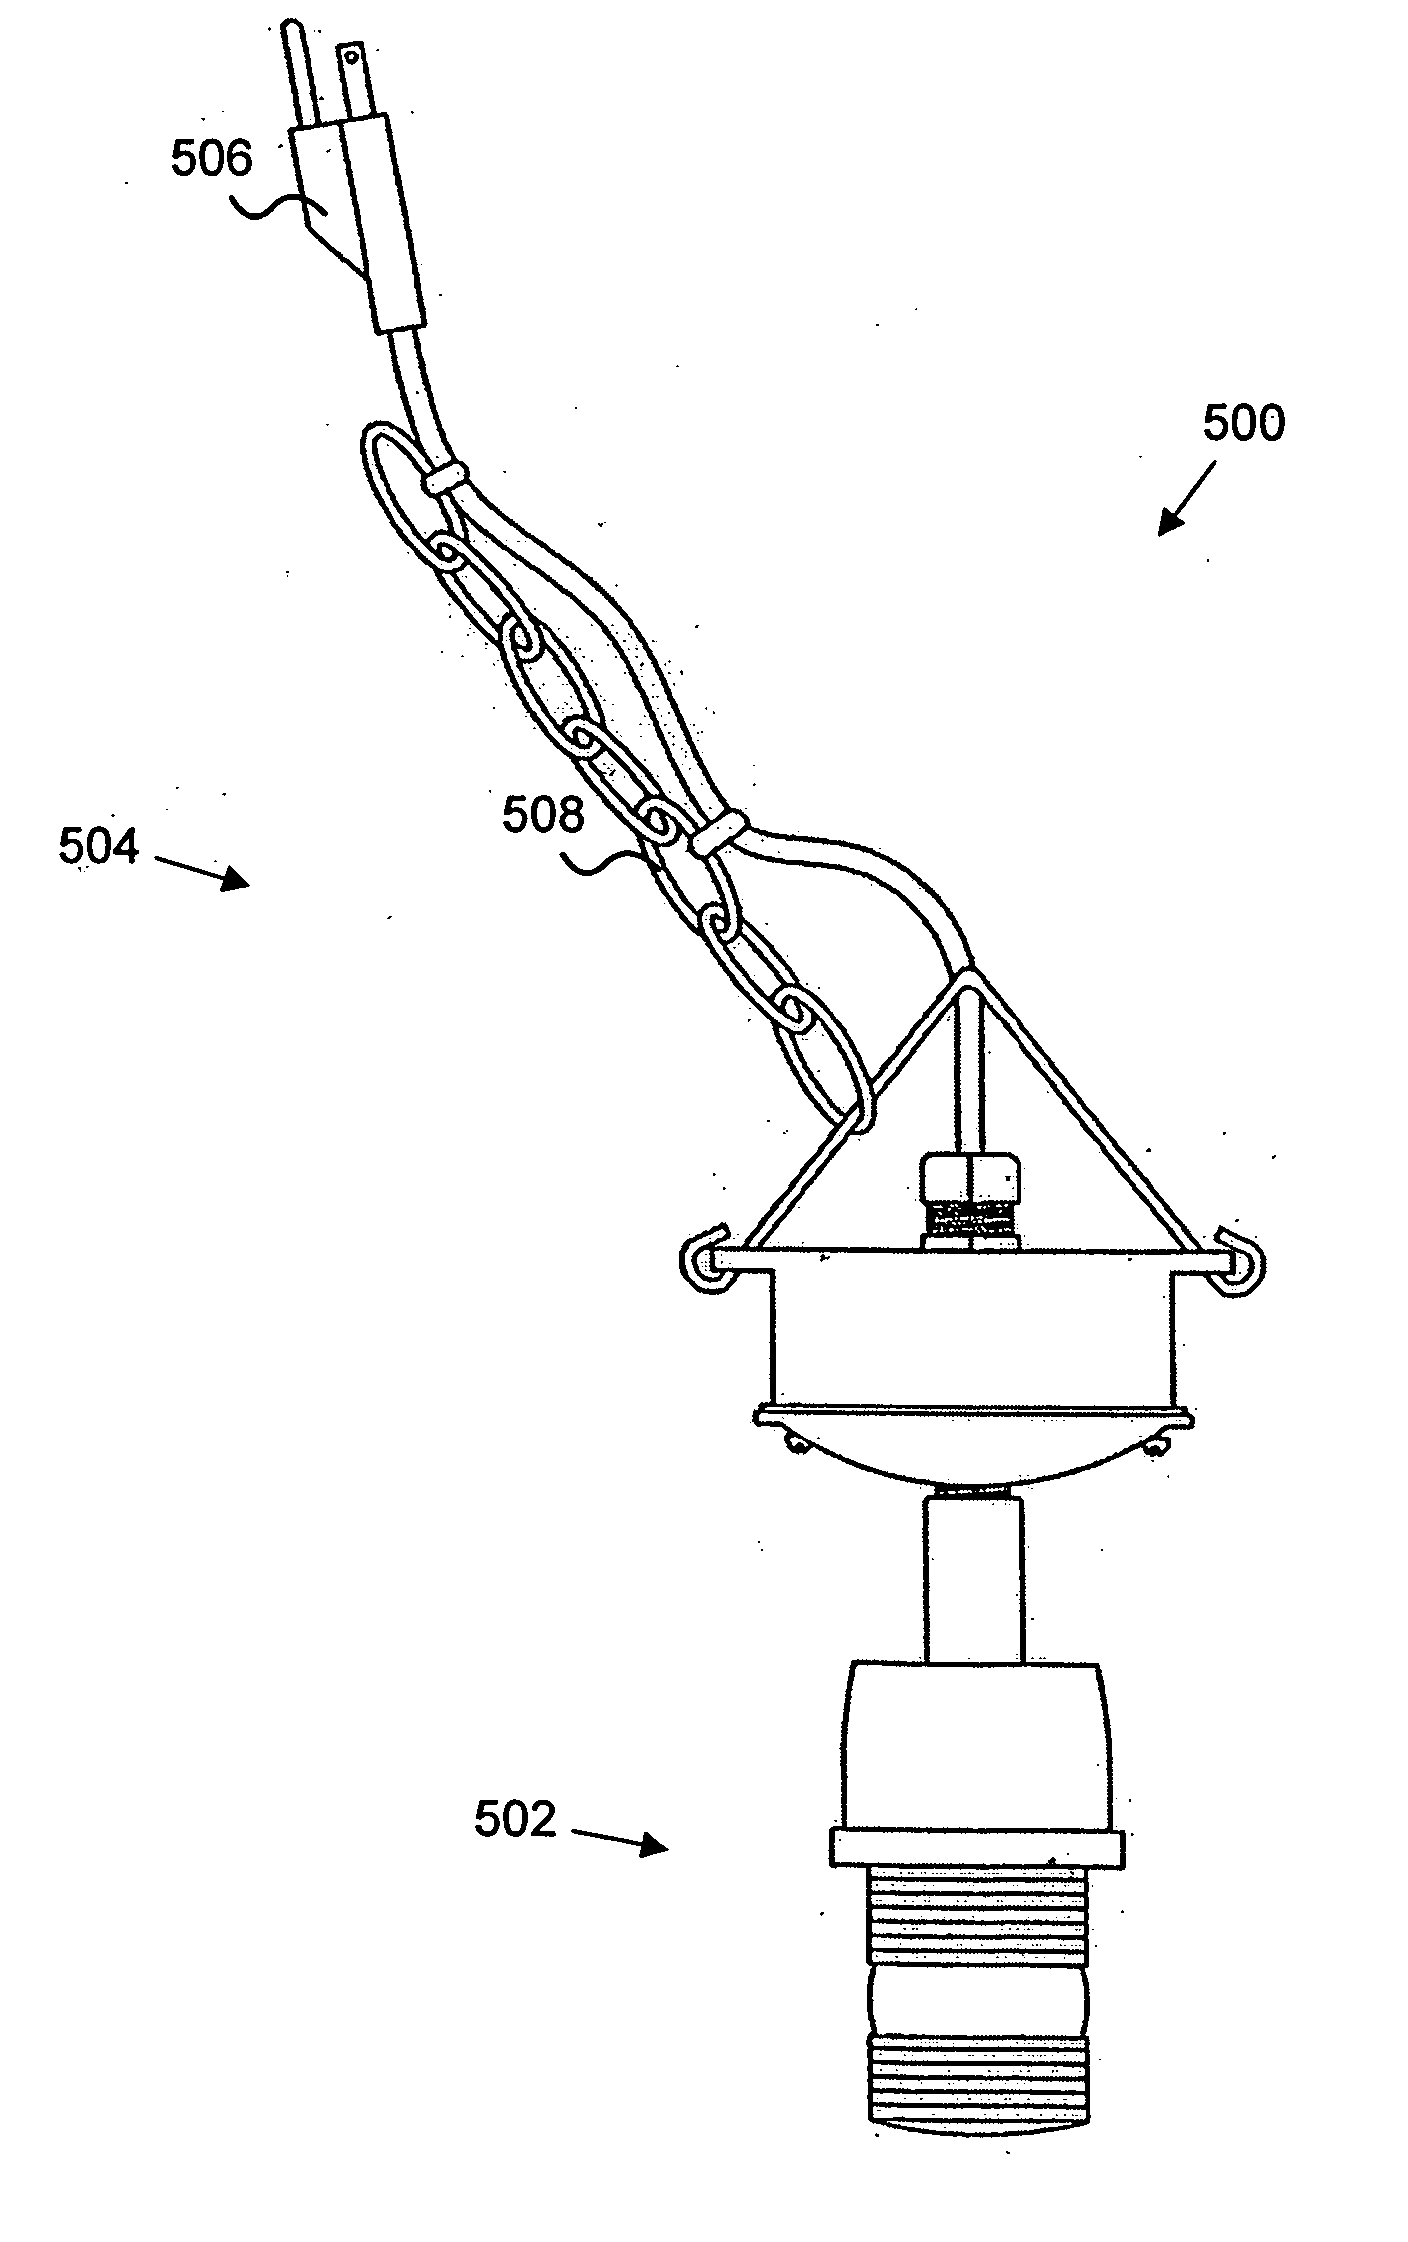 Method and apparatus for repelling pests